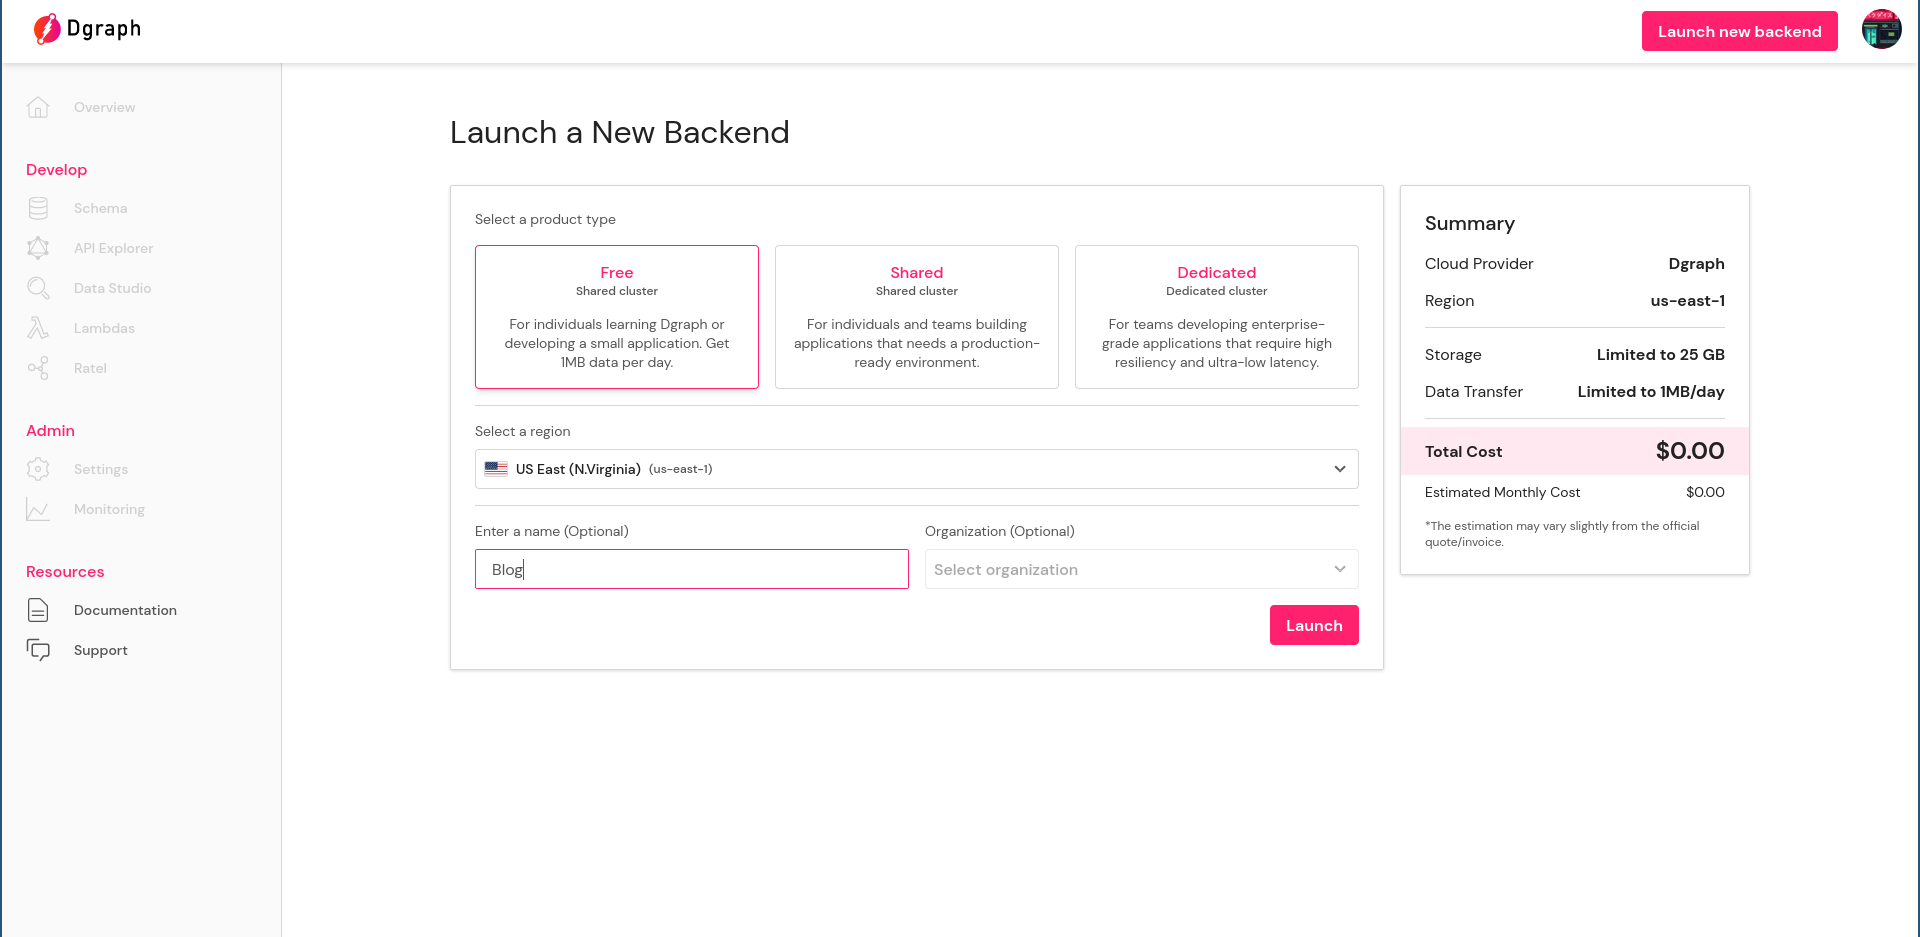 Fill in backend details and click "Launch"